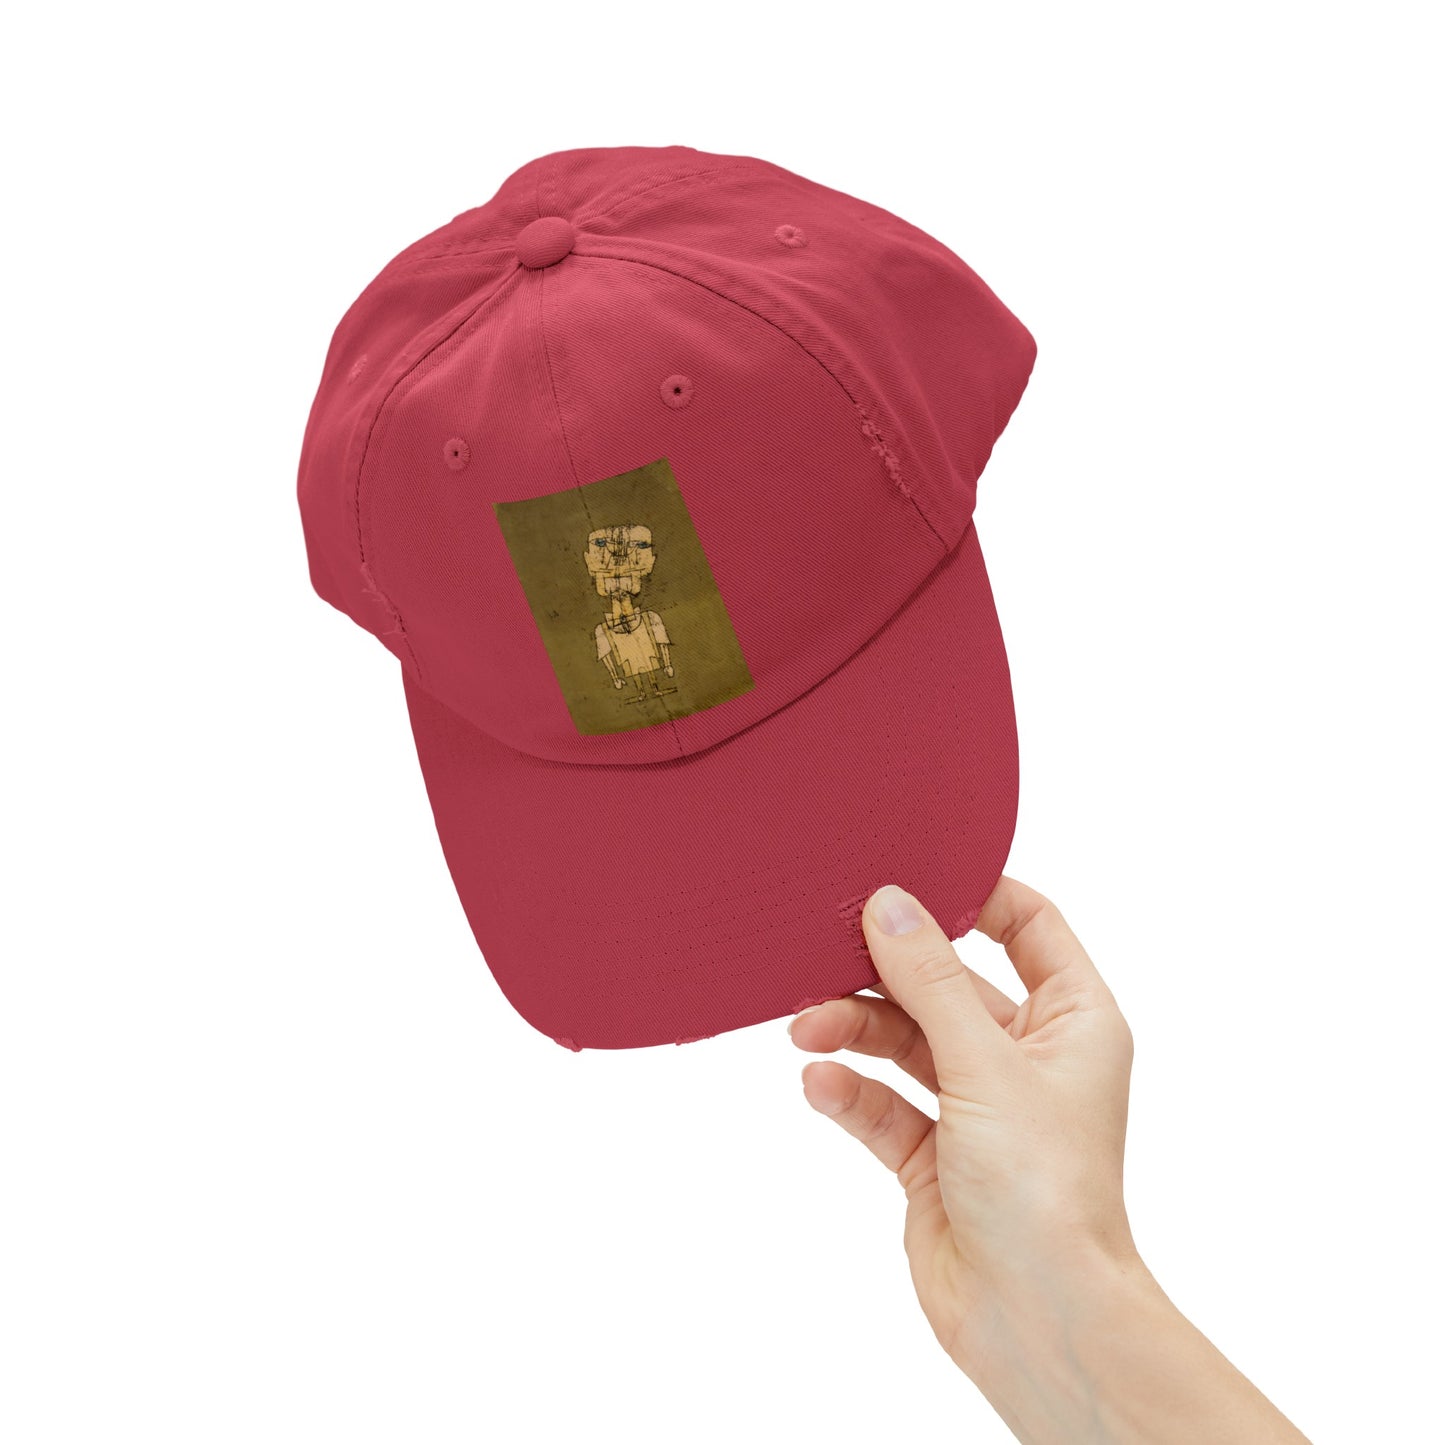 a hand holding a red hat with a picture of a dog on it